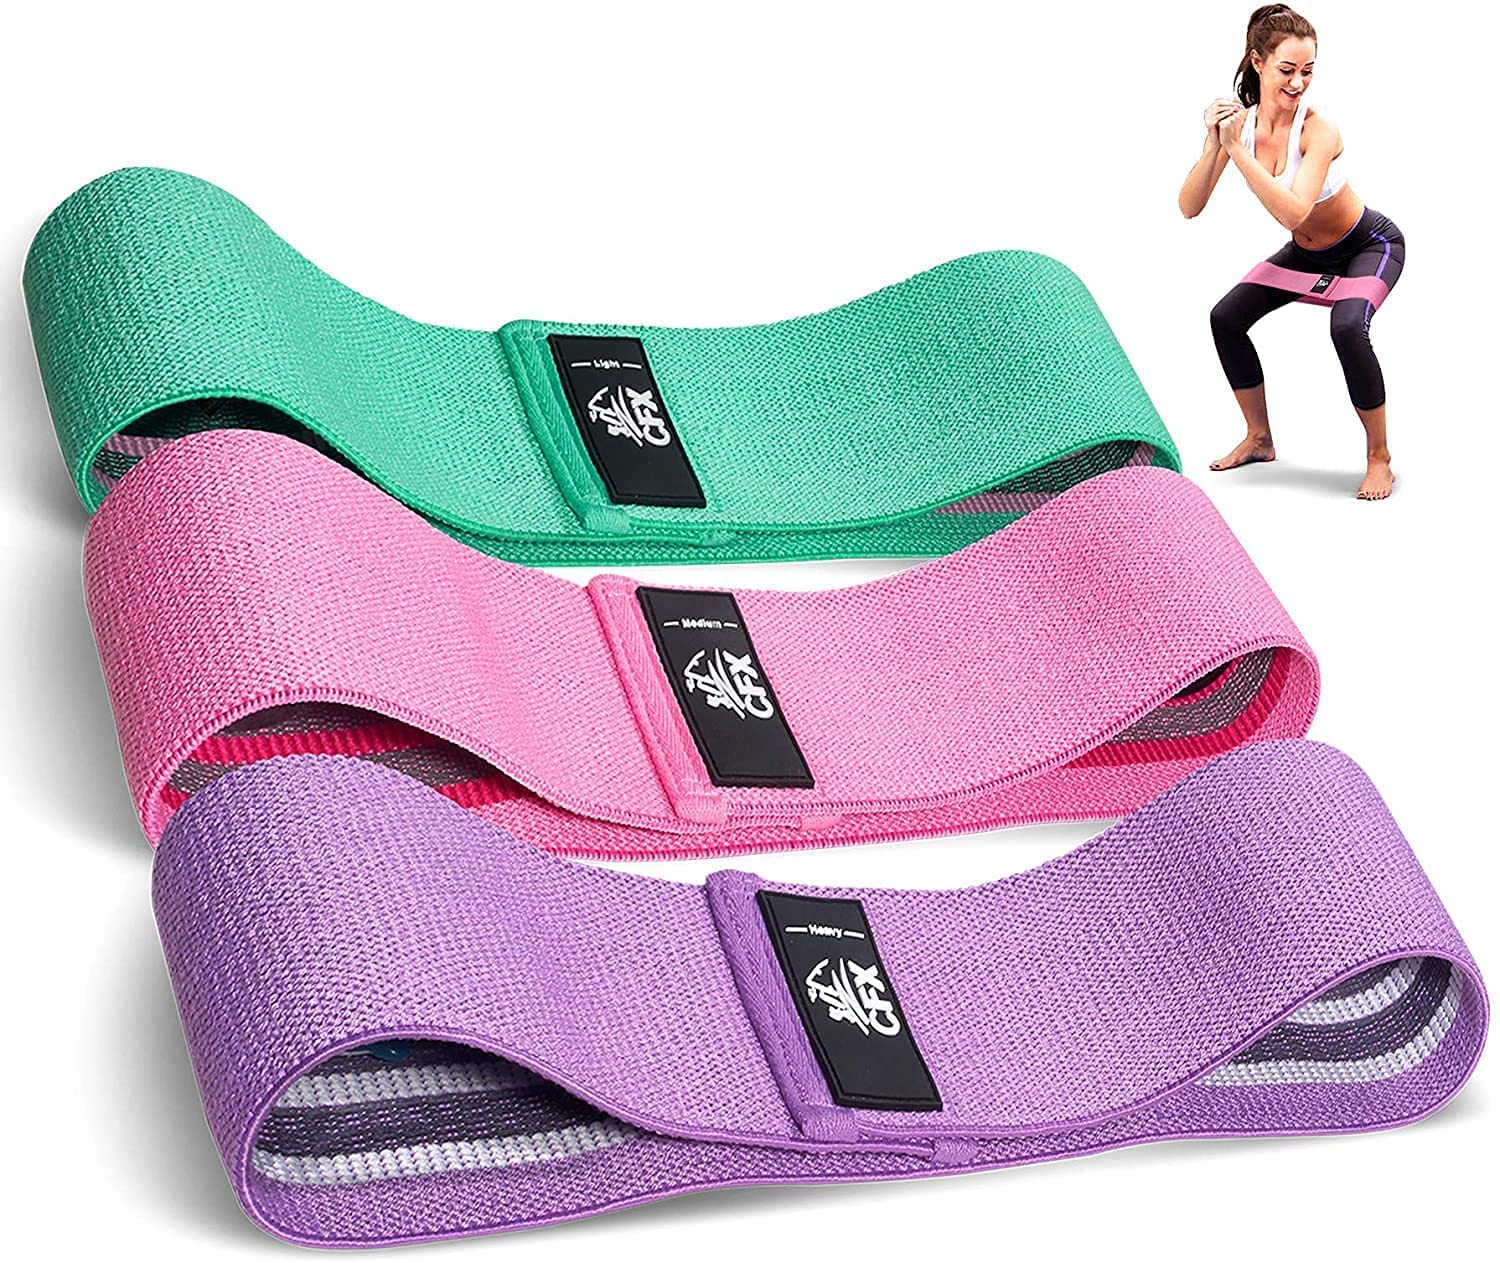 CFX Resistance Bands 3 Sets, Premium Exercise Bands with Non-Slip Design for Hips & Glutes, 3 Resistance Level Workout Booty Bands for Women and Men,Home Training,Fitness,Yoga